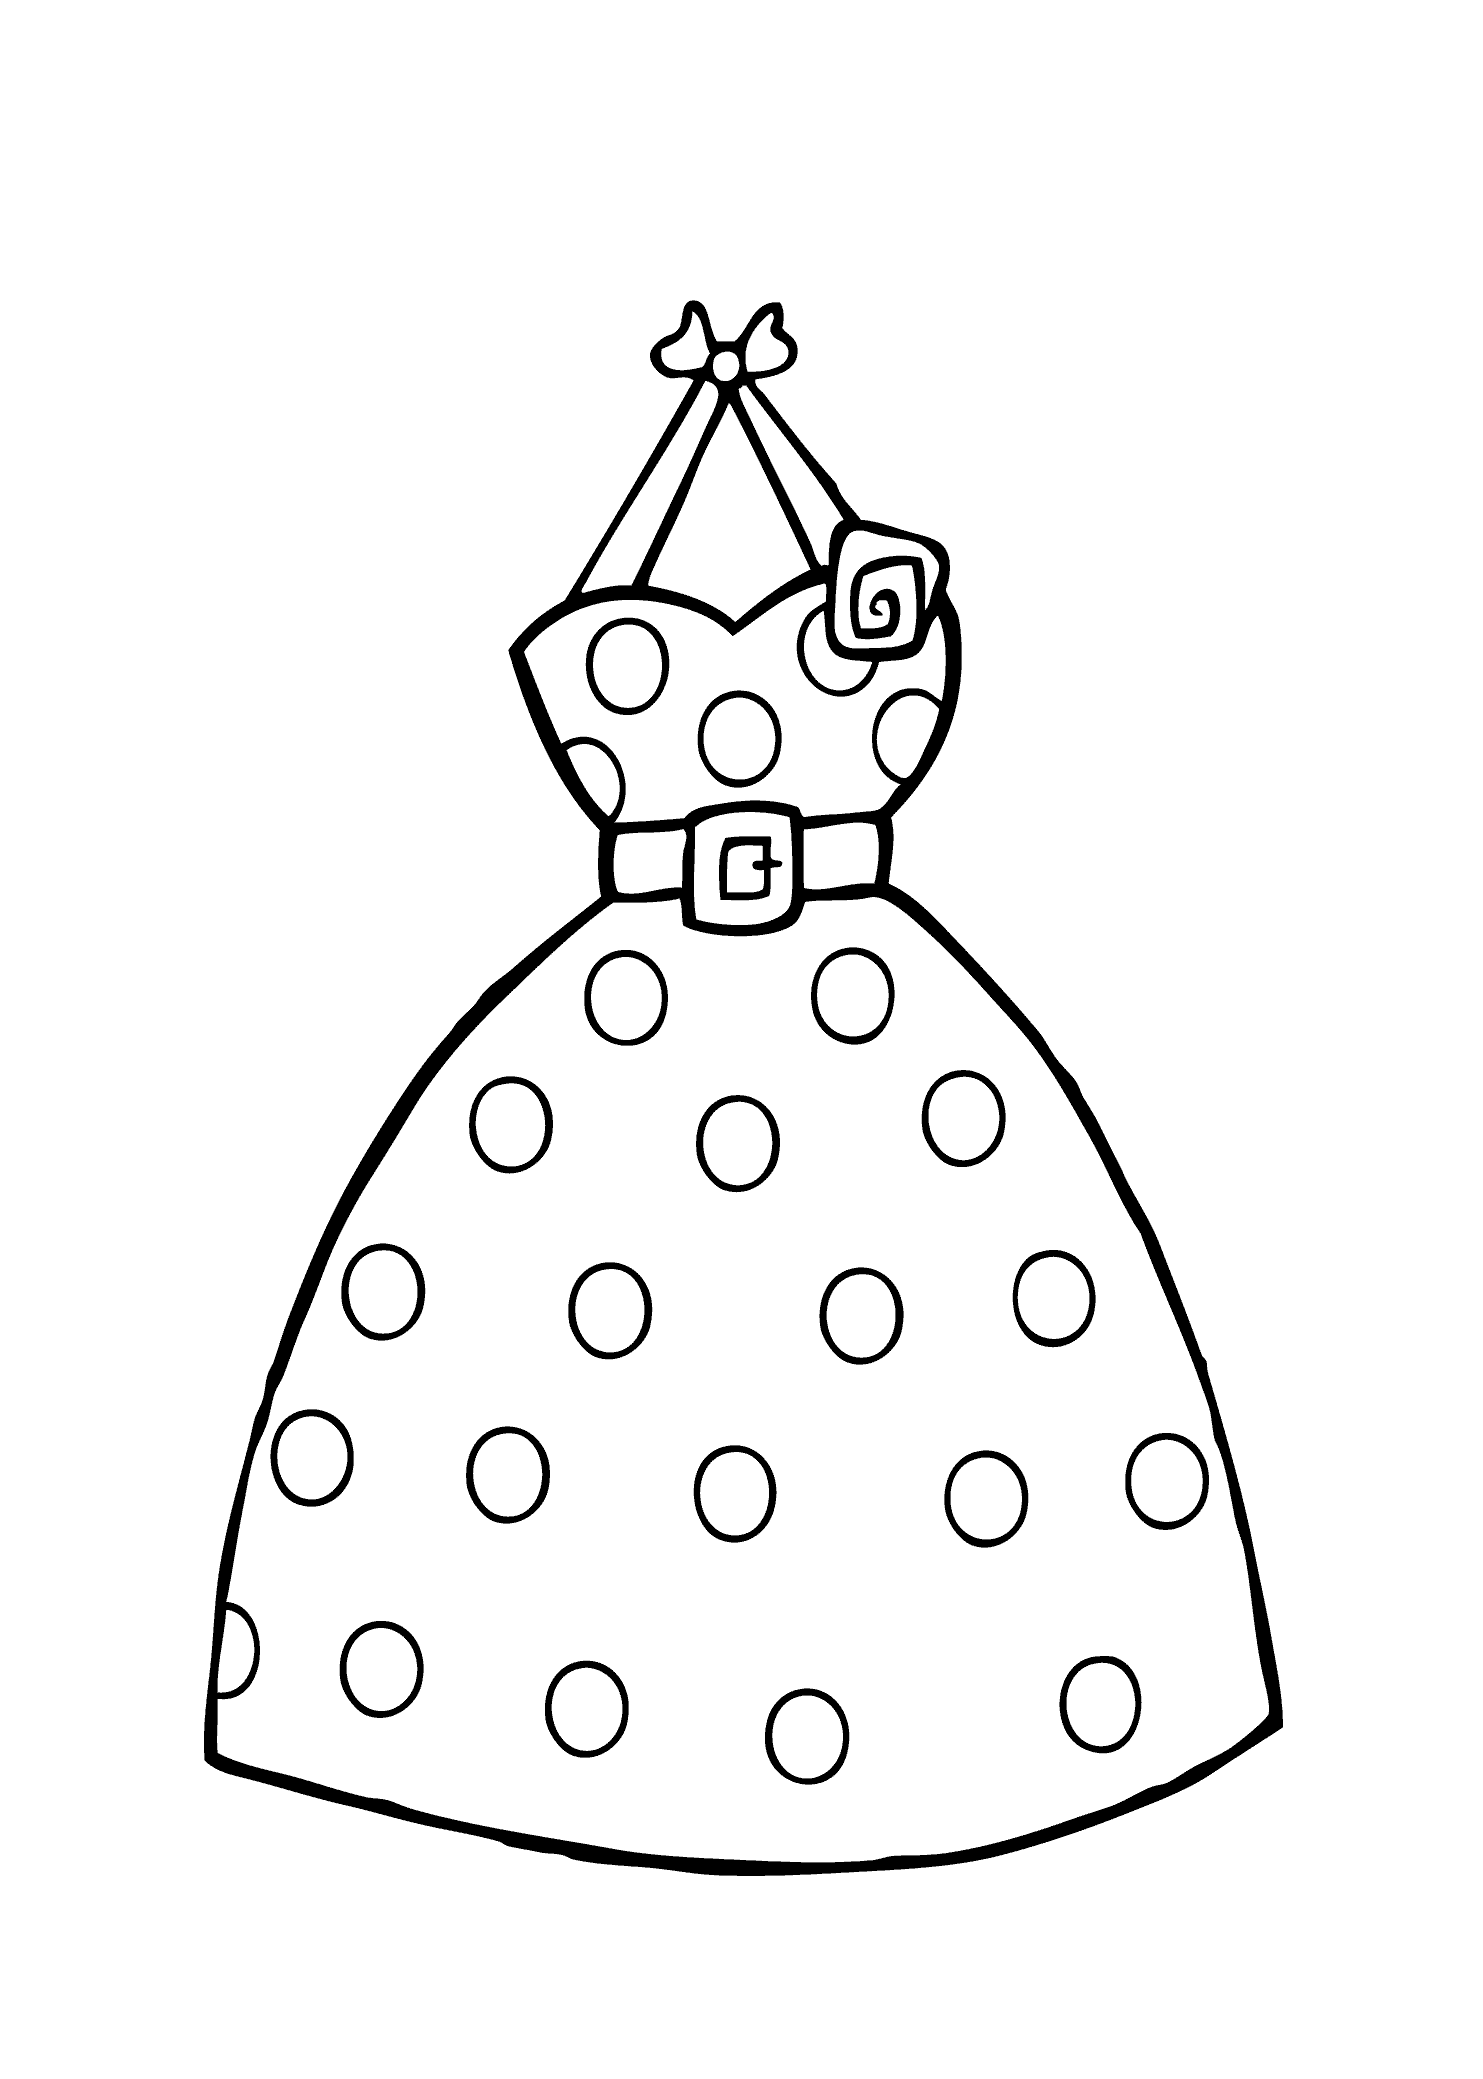 coloring pages of dresses dress coloring pages to download and print for free dresses coloring pages of 